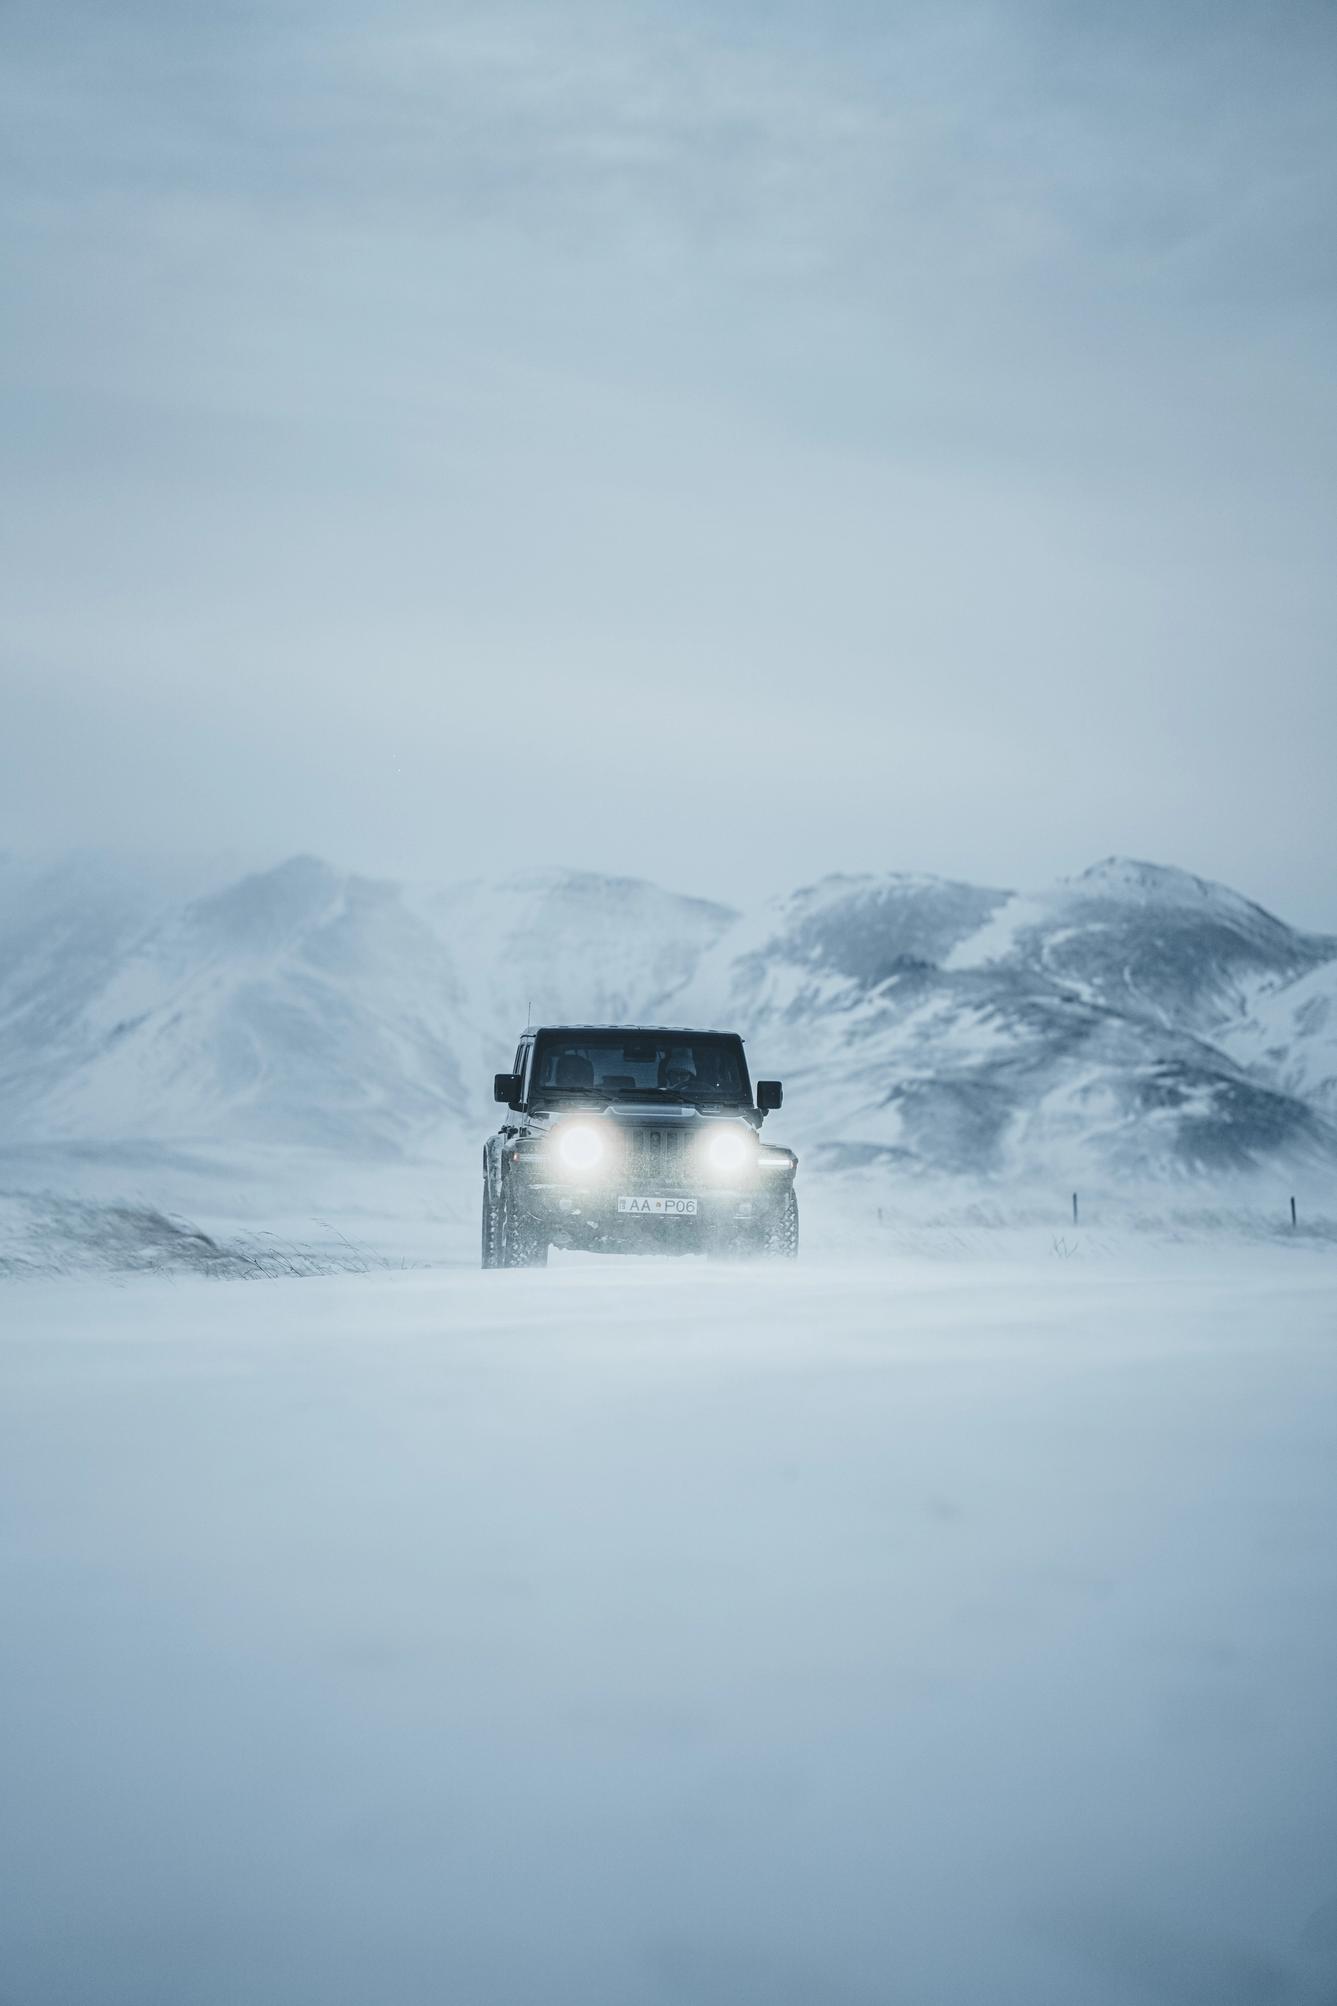 4x4 rental car Jeep Wrangler Rubicon driving in the winter in Iceland